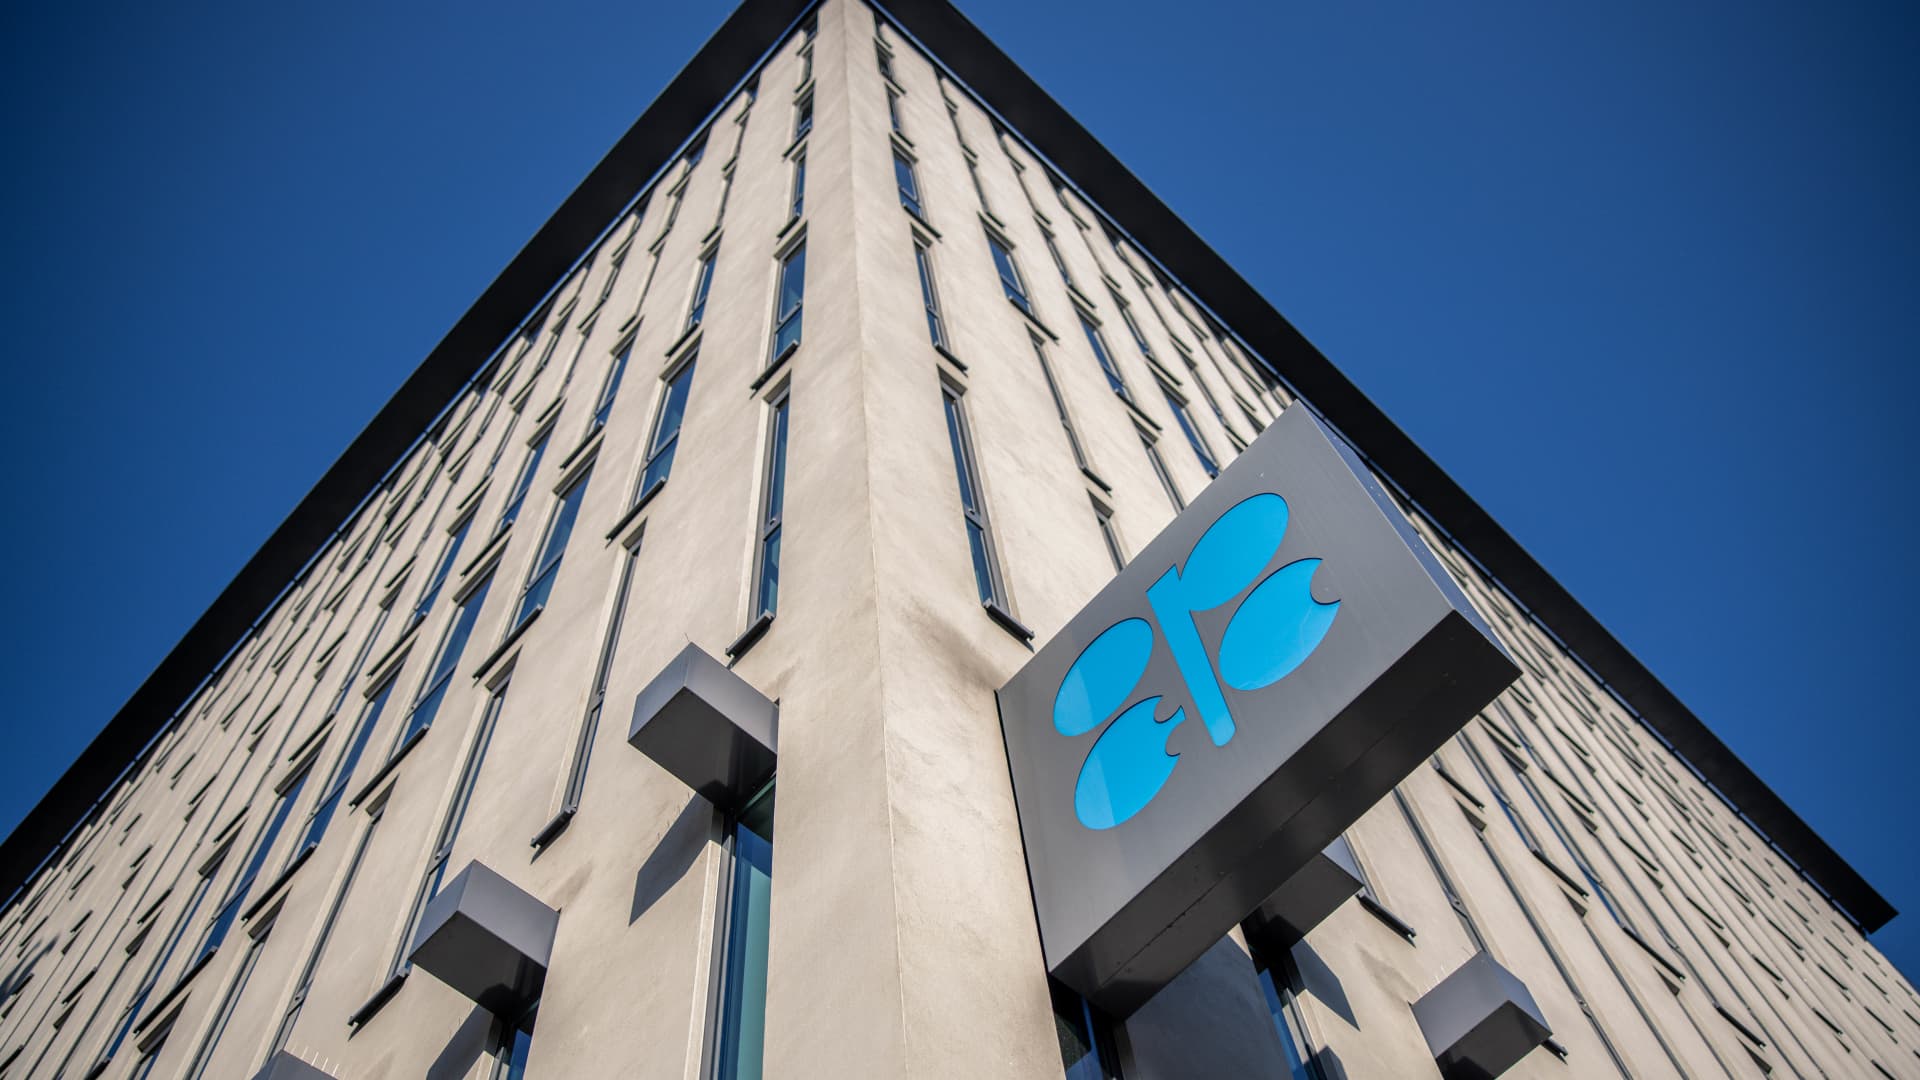 OPEC+ agreed in early October to reduce production by 2 million barrels per day from November. It came despite calls from the U.S. for OPEC+ to pump more to lower fuel prices and help the global economy.